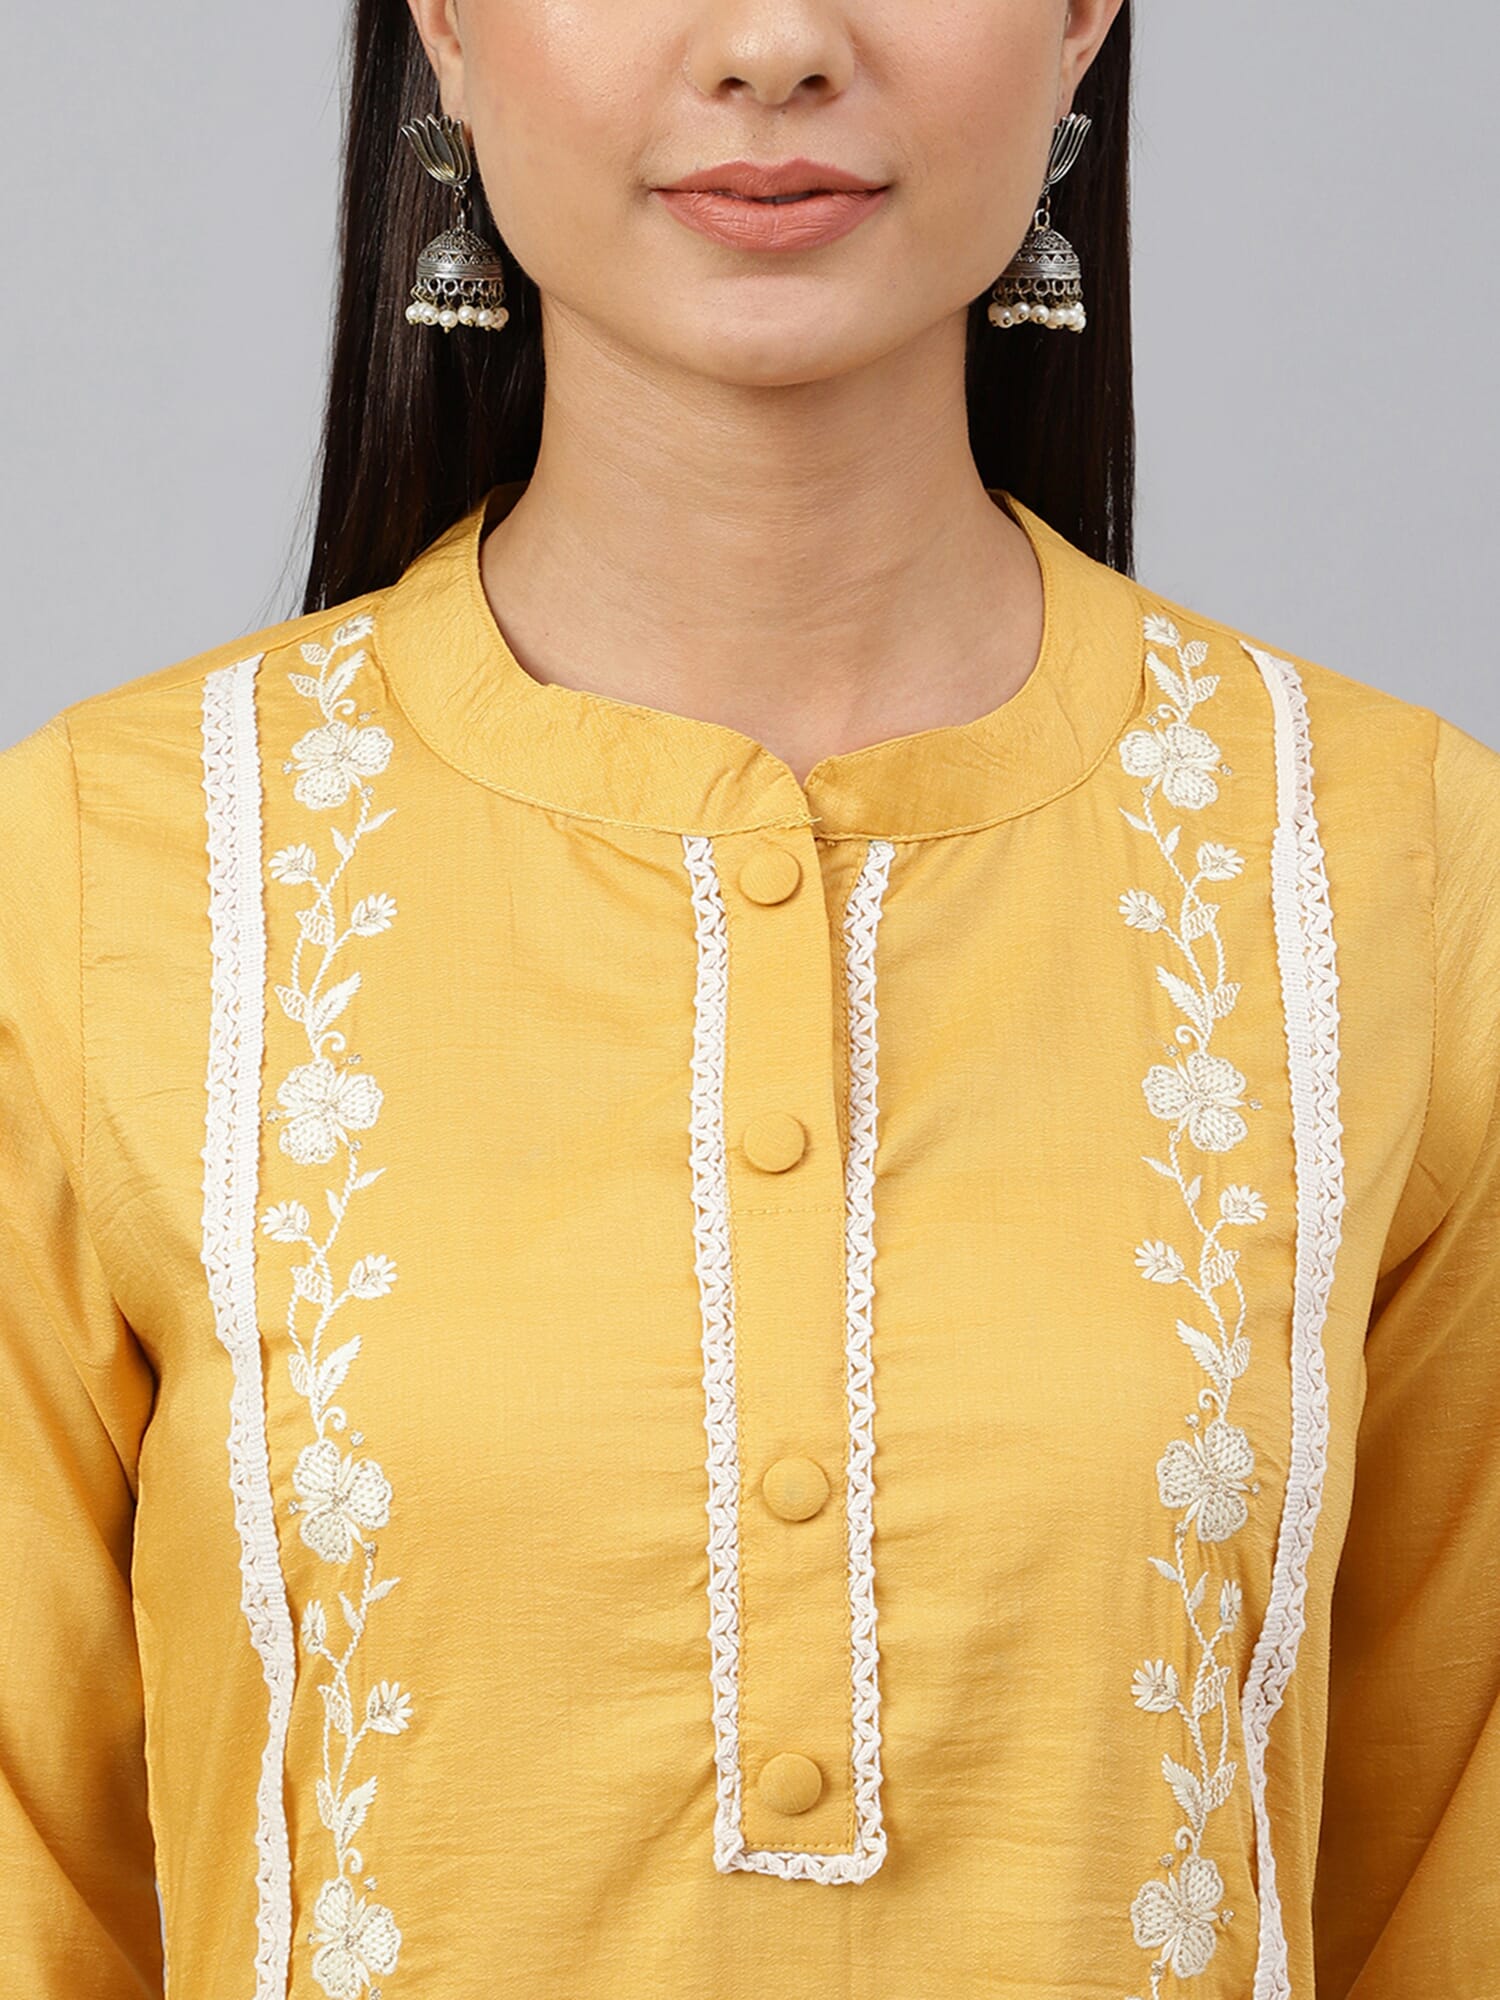 Women's Mustard Poly Silk Floral Embroidery Kurta with Pant and Dupatta